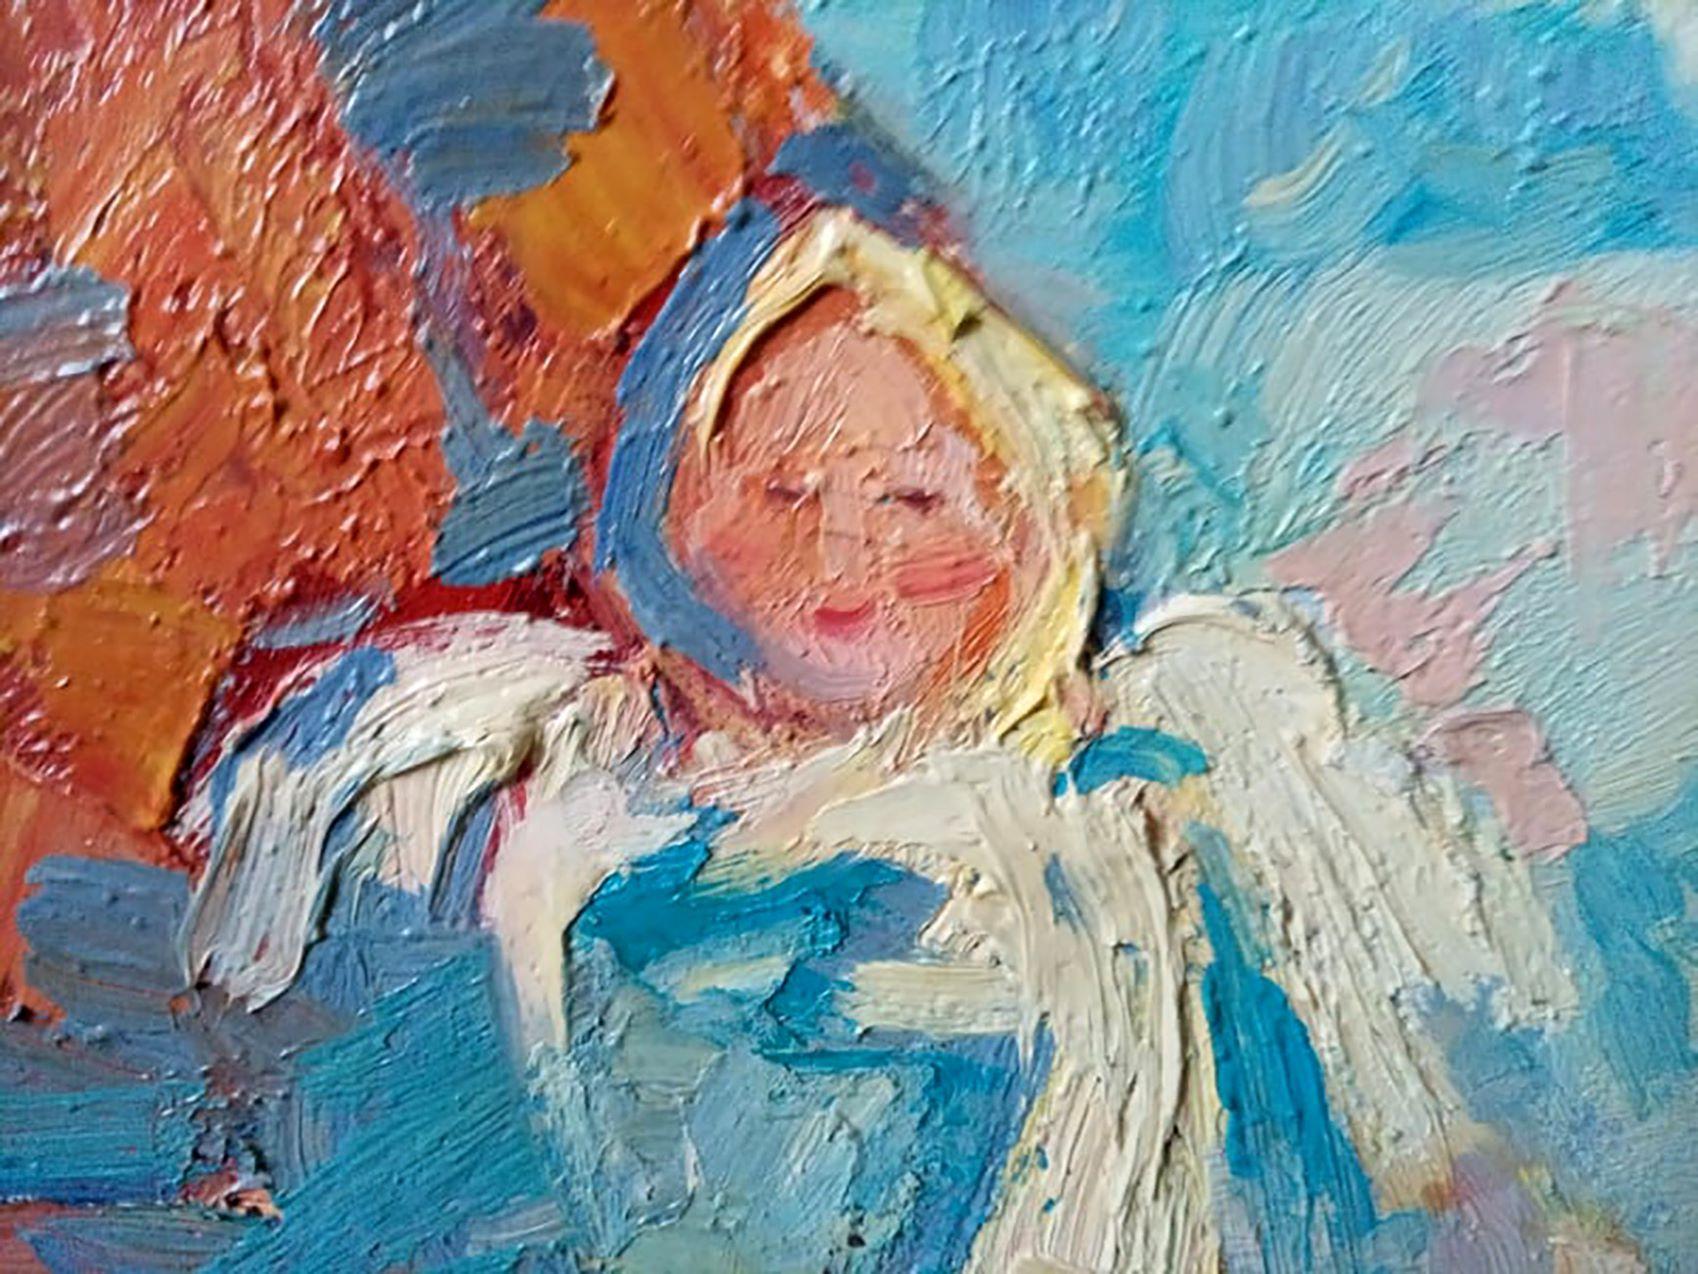 Artist: Alex Kalenyuk 
Work: Original oil painting, handmade artwork, one of a kind 
Medium: Oil on canvas 
Year: 2012
Style: Impressionism
Title: The star came down clear, 
Size: 35.5